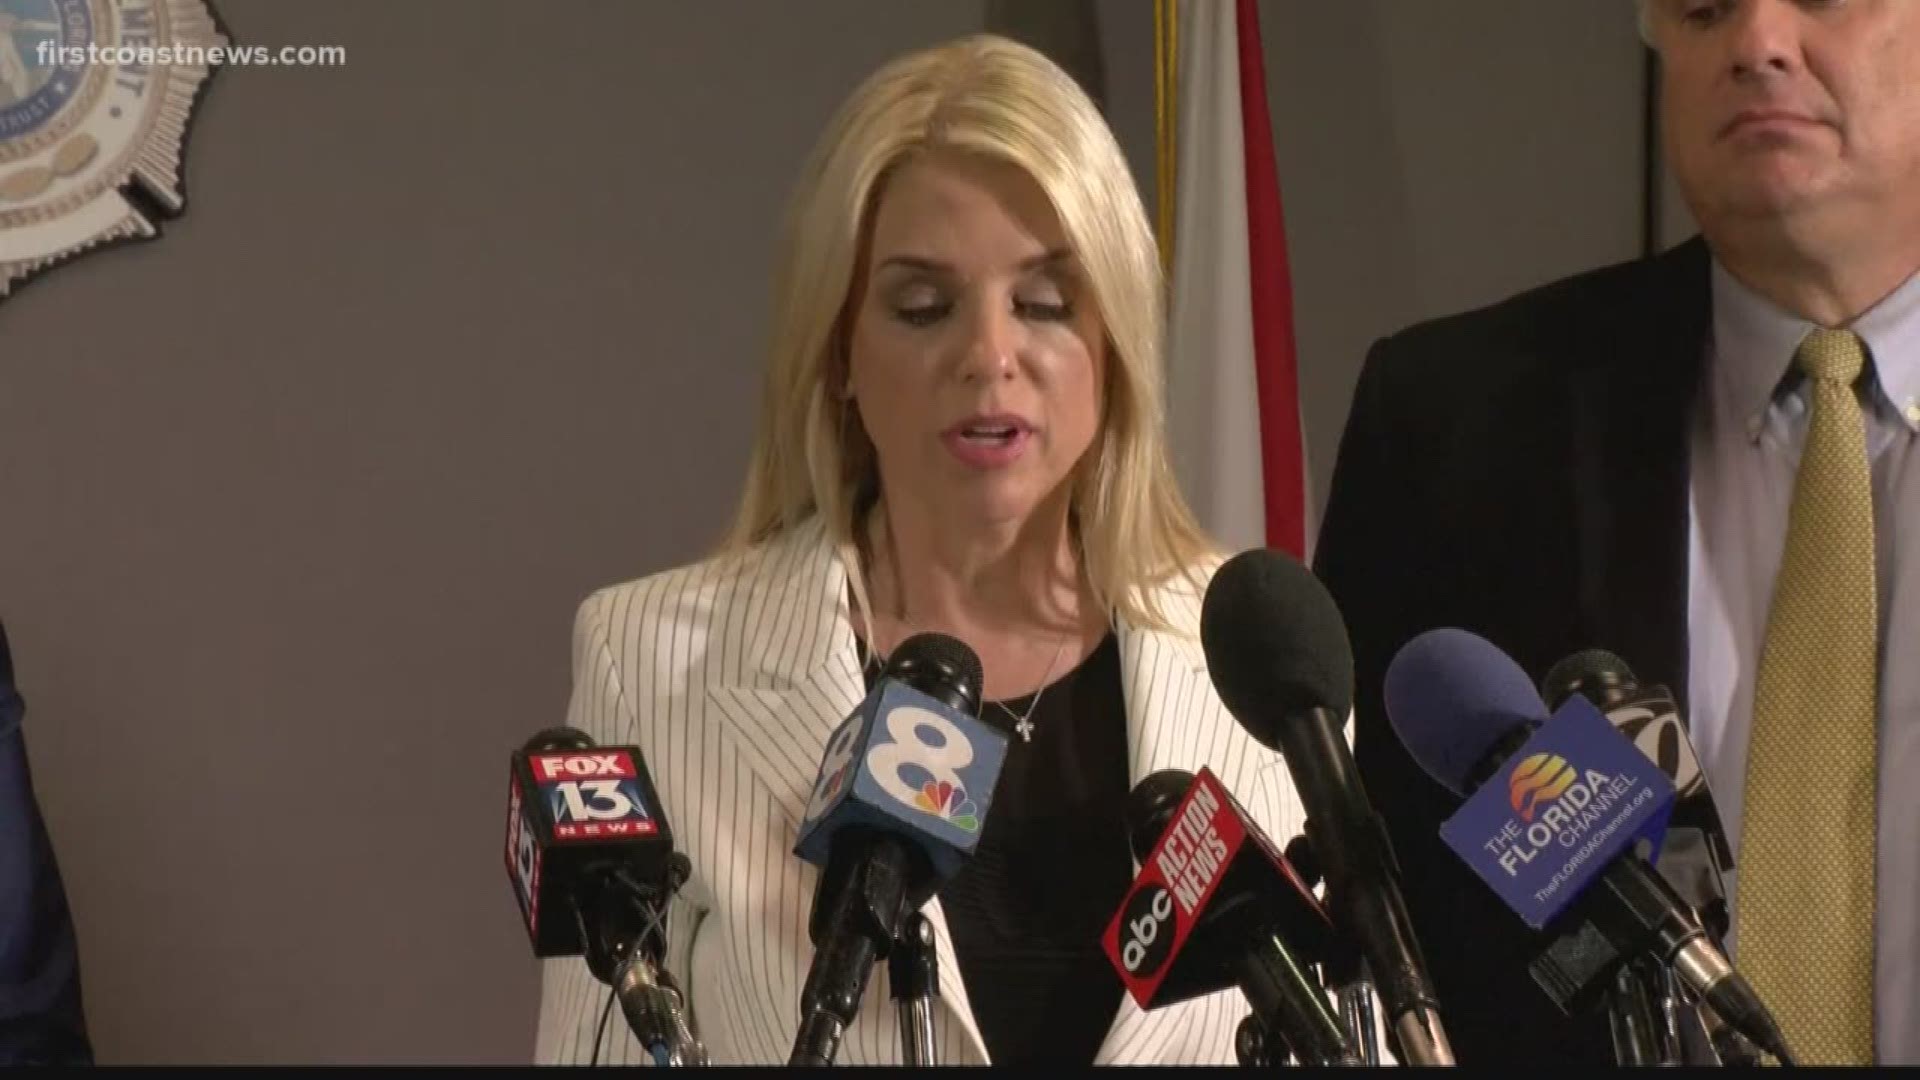 Attorney General Pam Bondi said Thursday that at least 15 victims of abuse have already come forward to state authorities.